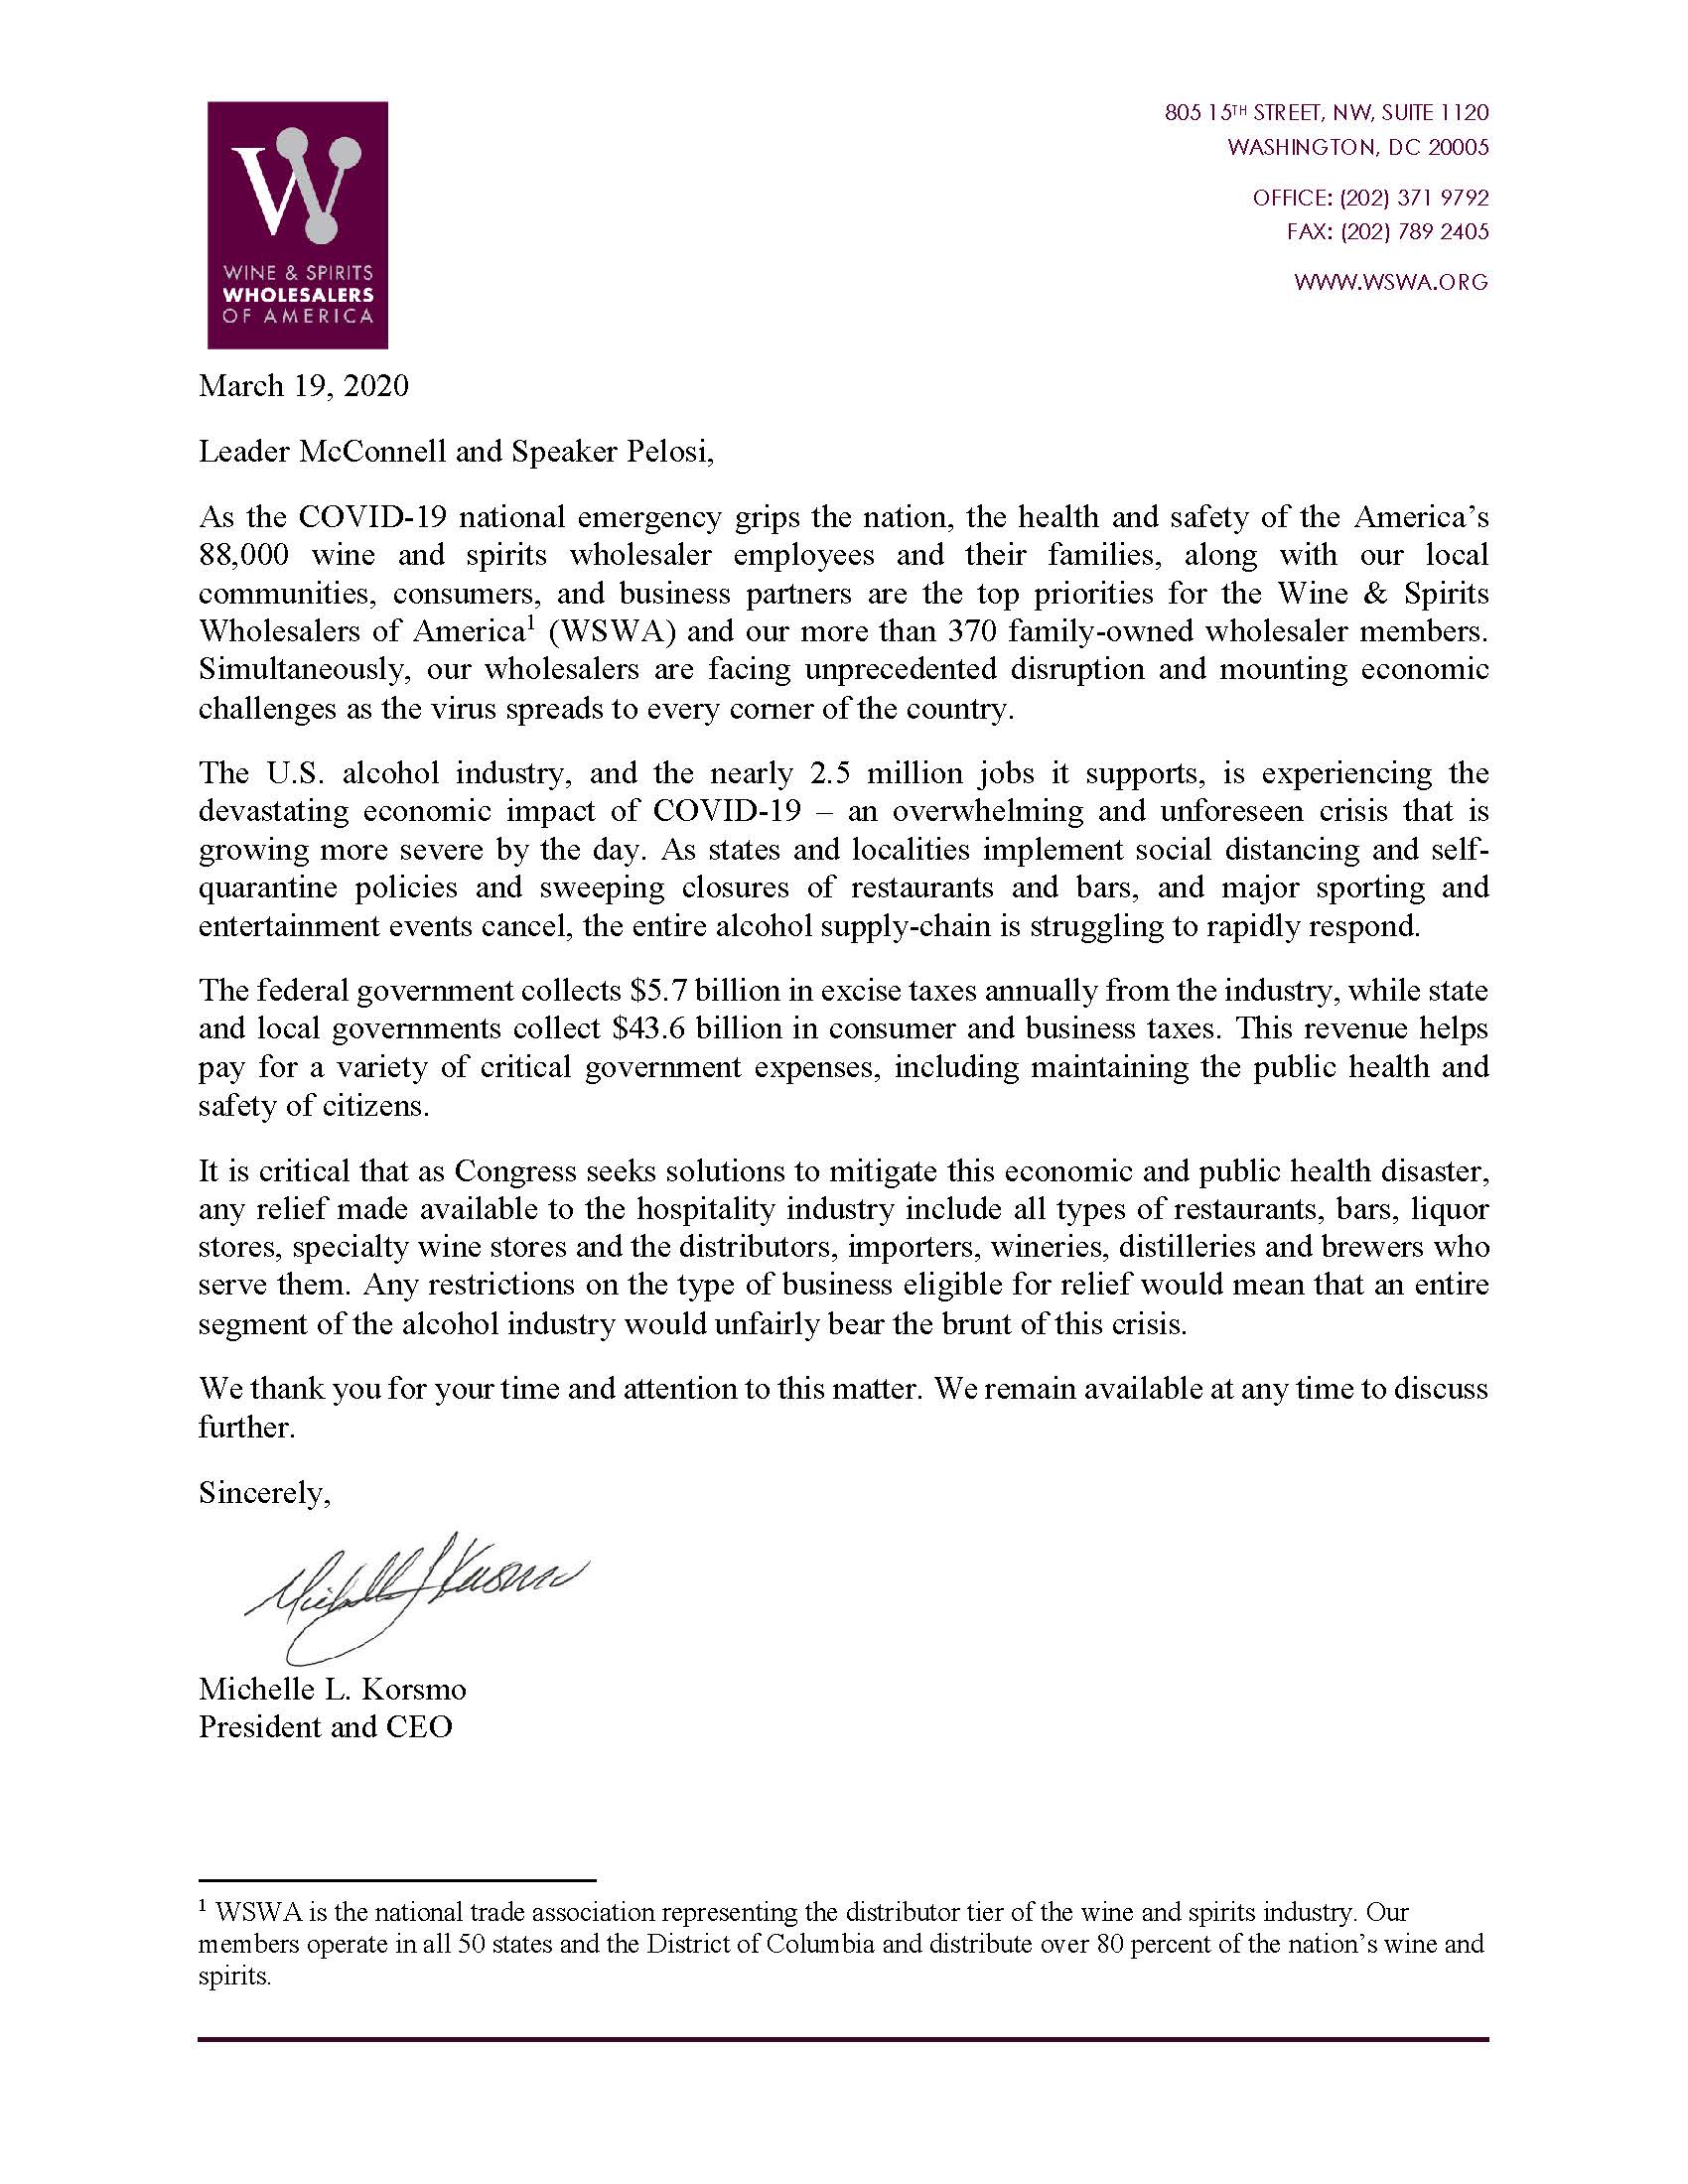 WSWA Hospitality Relief Letter